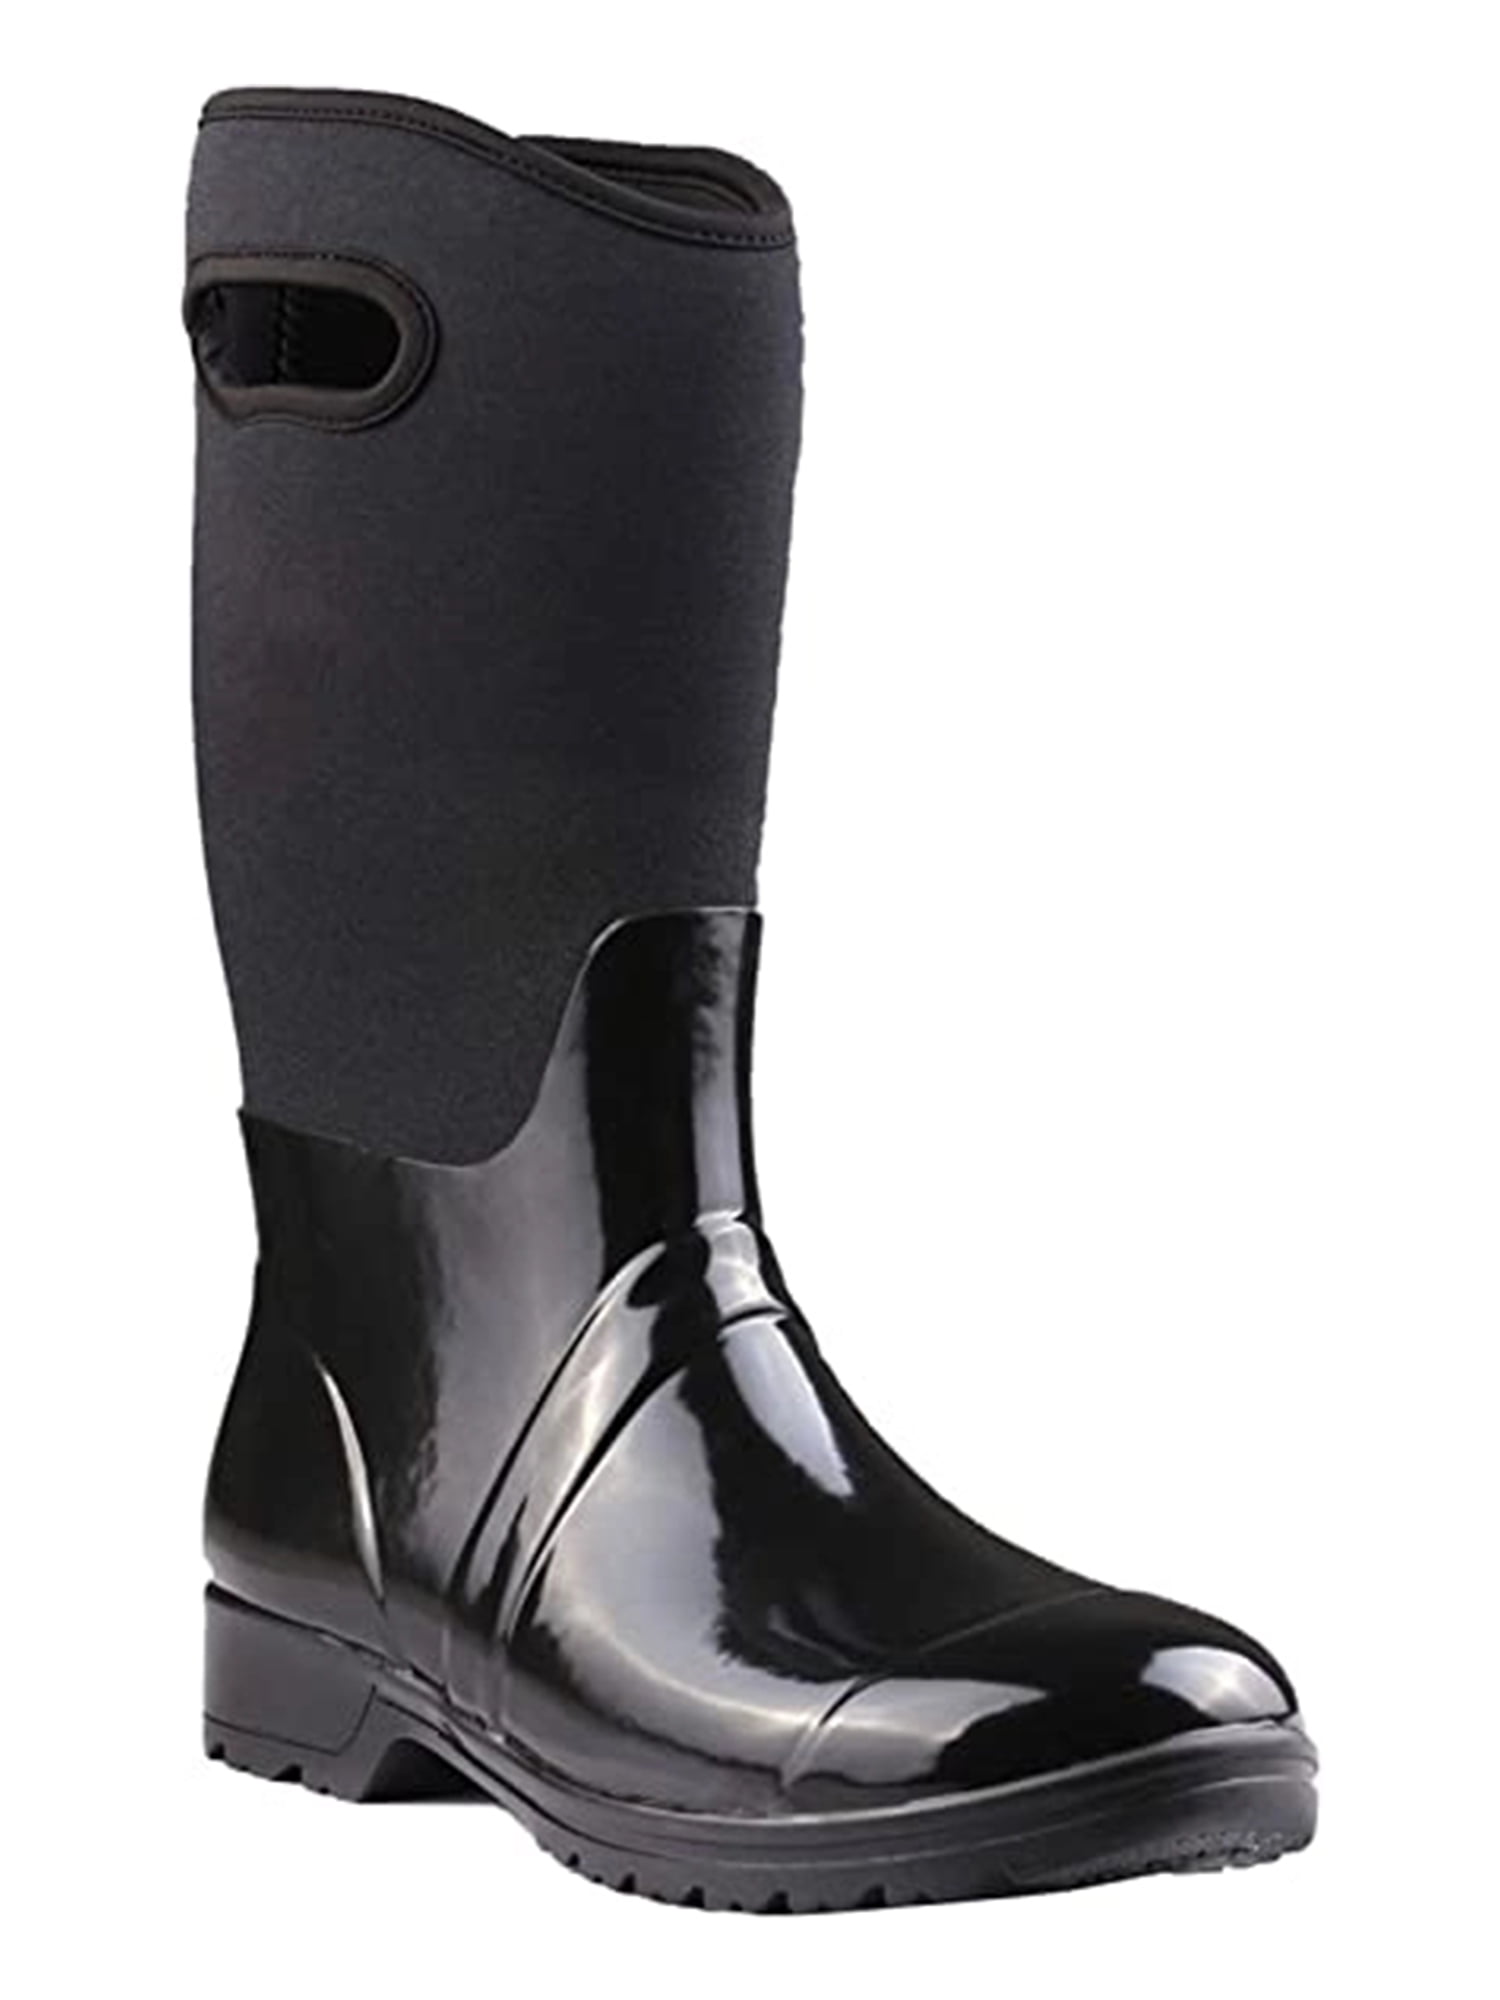 OwnShoe Womens Rain Boots Pull-On Water 